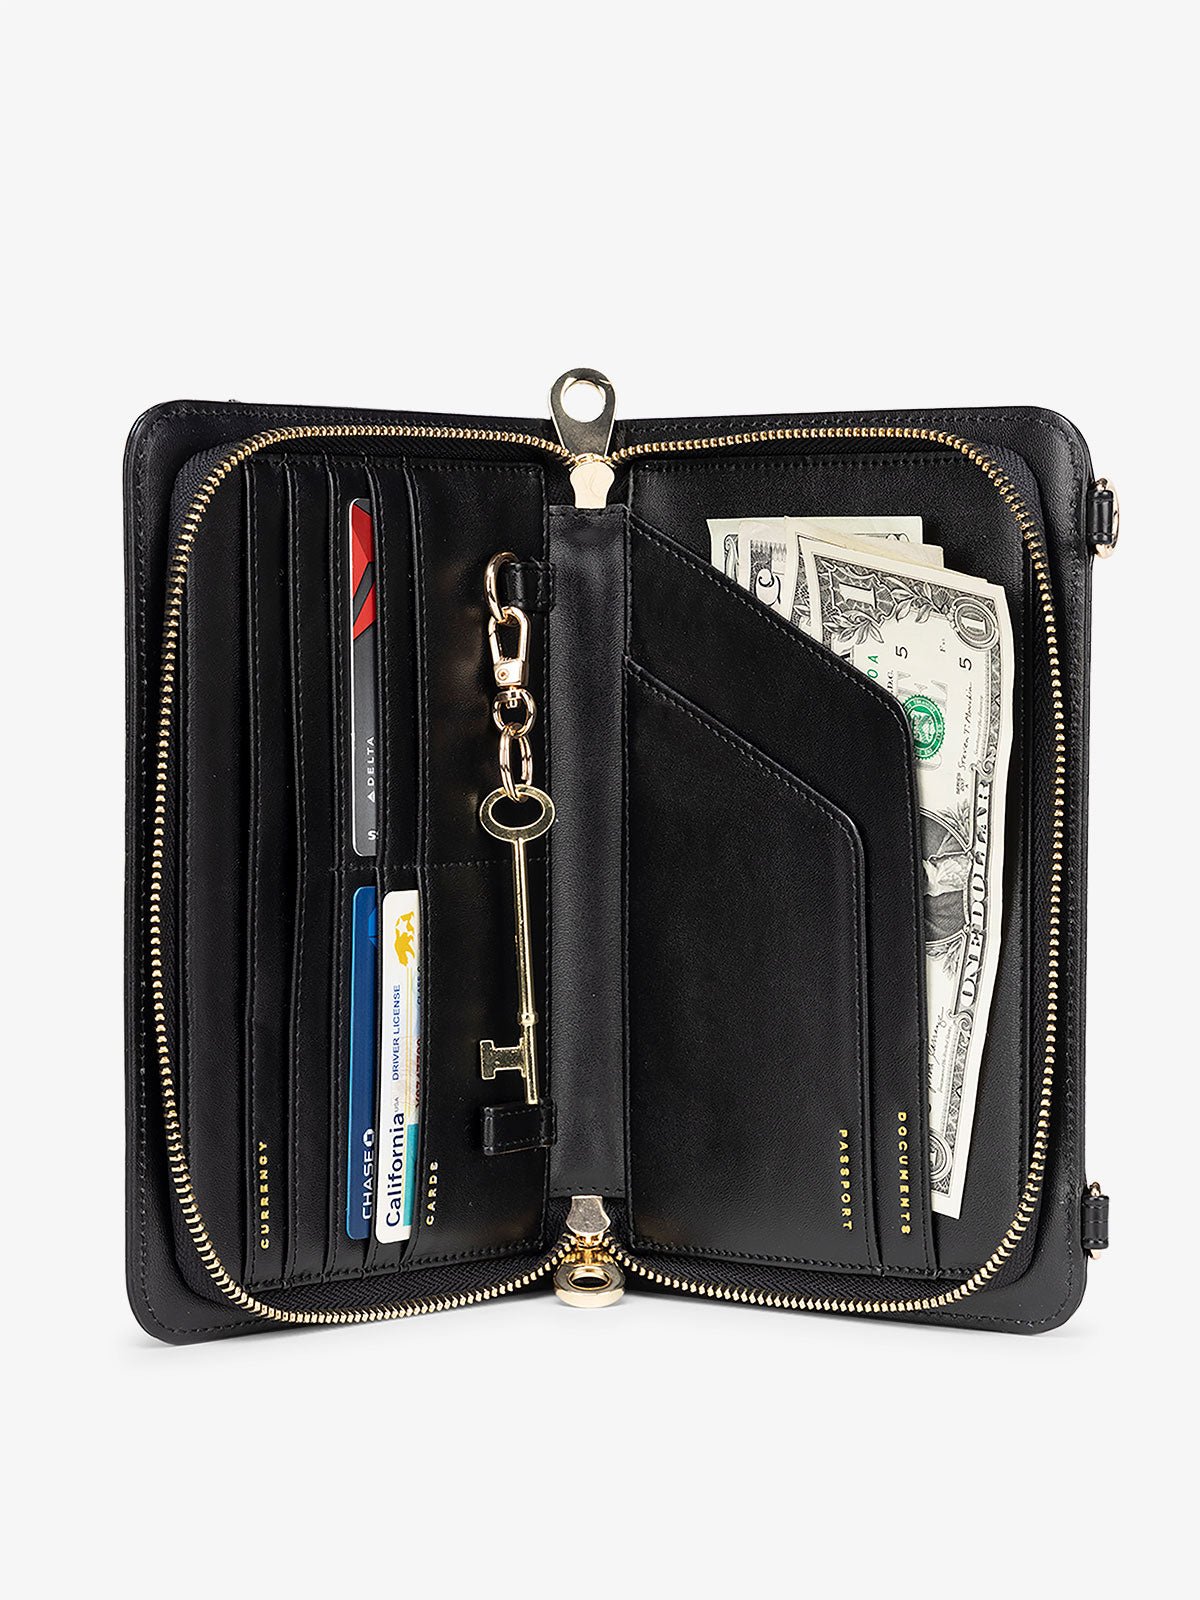 Interior of black RFID lined CALPAK Croc Wallet featuring multiple pockets for cards and travel documents